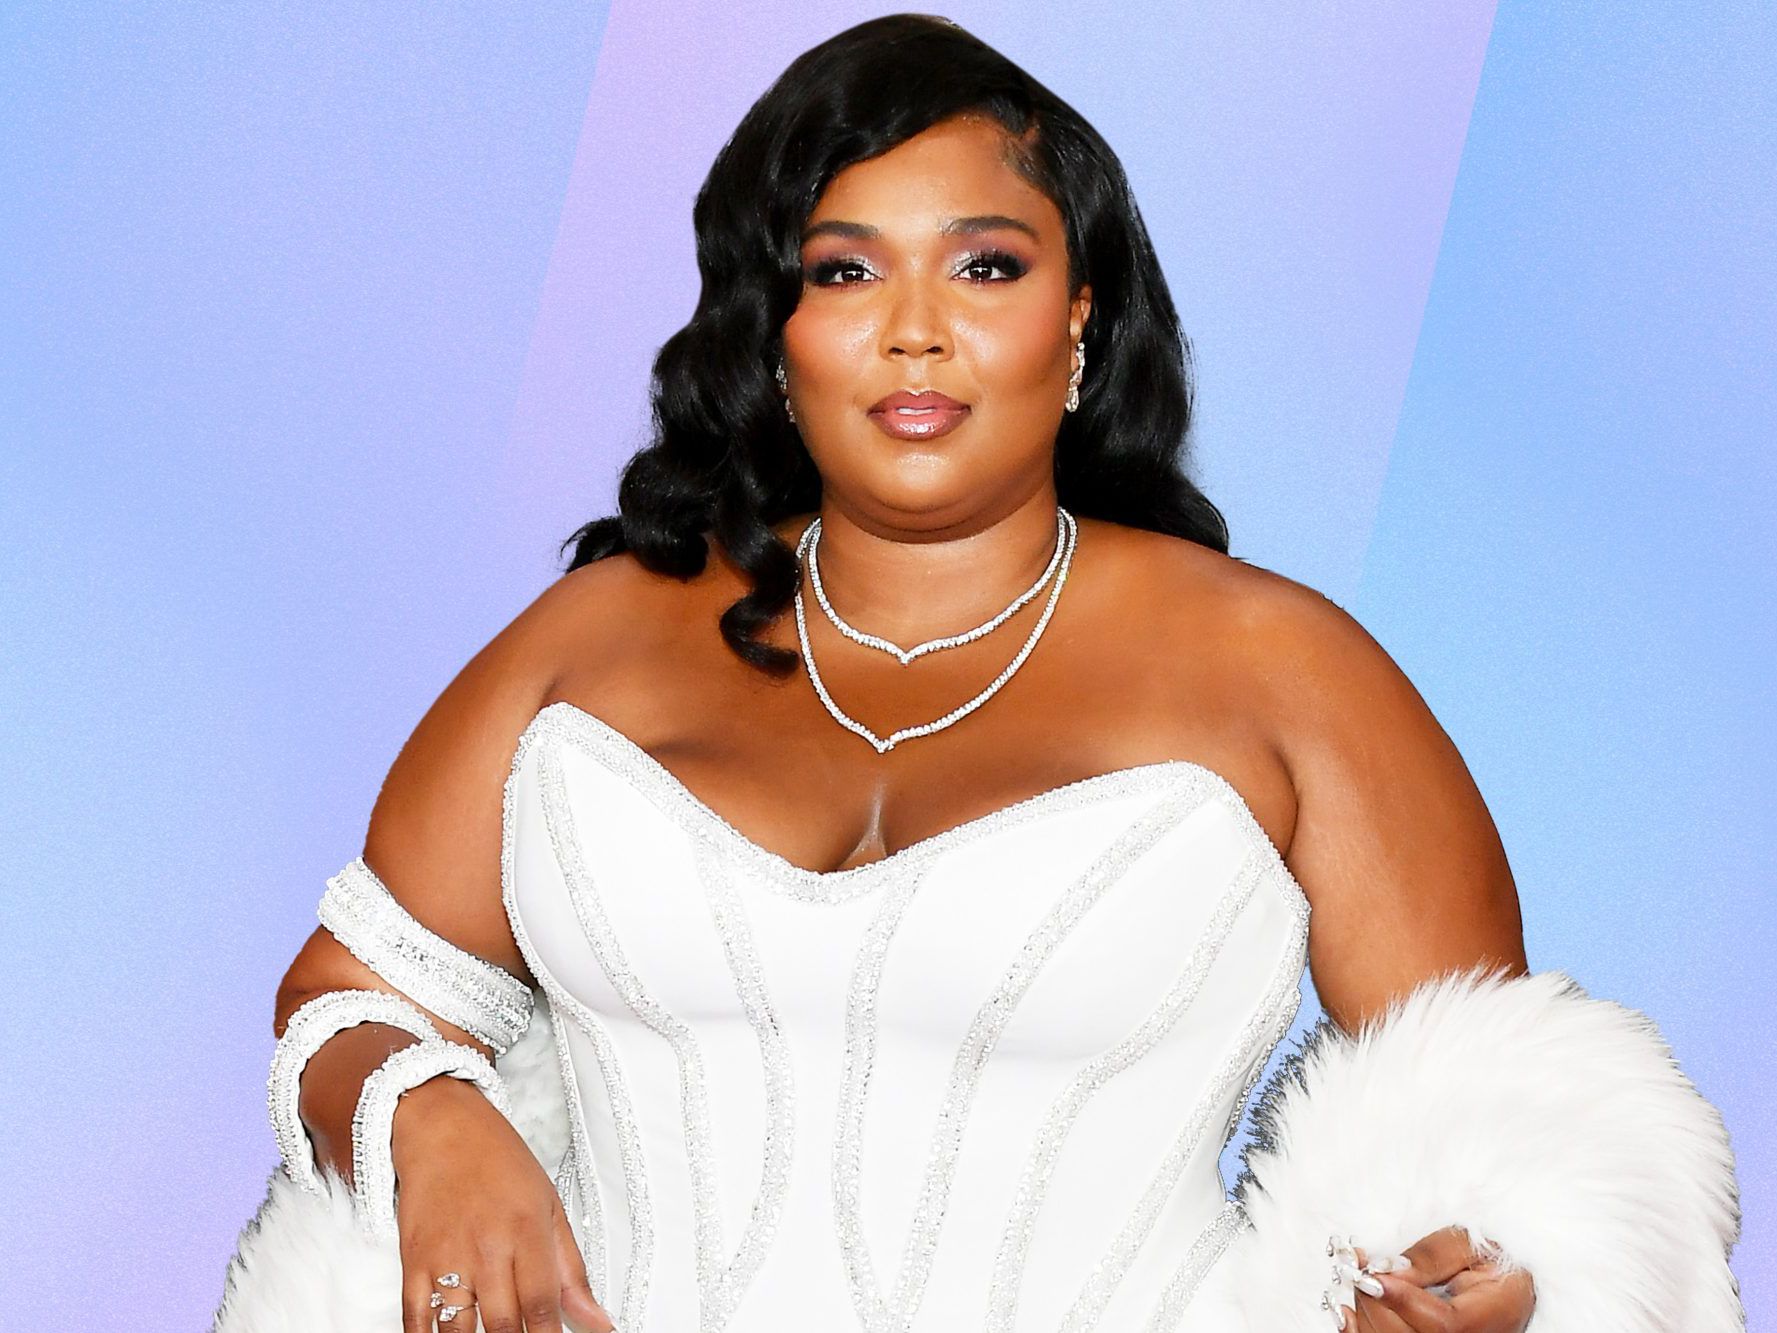 How much does Lizzo weigh?